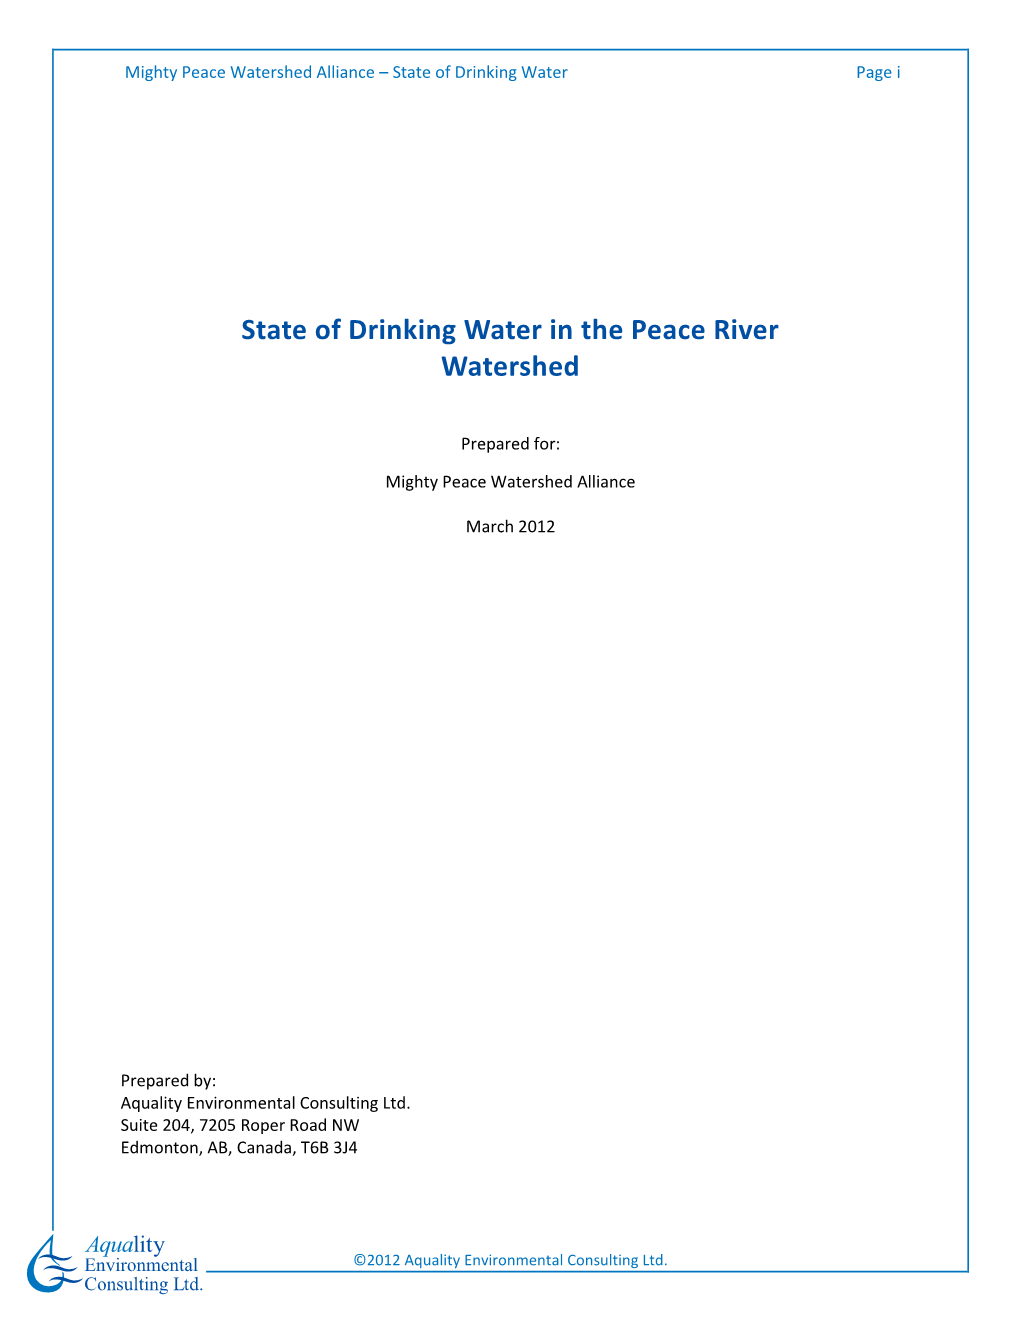 State of Drinking Water in the Peace River Watershed Final March 5